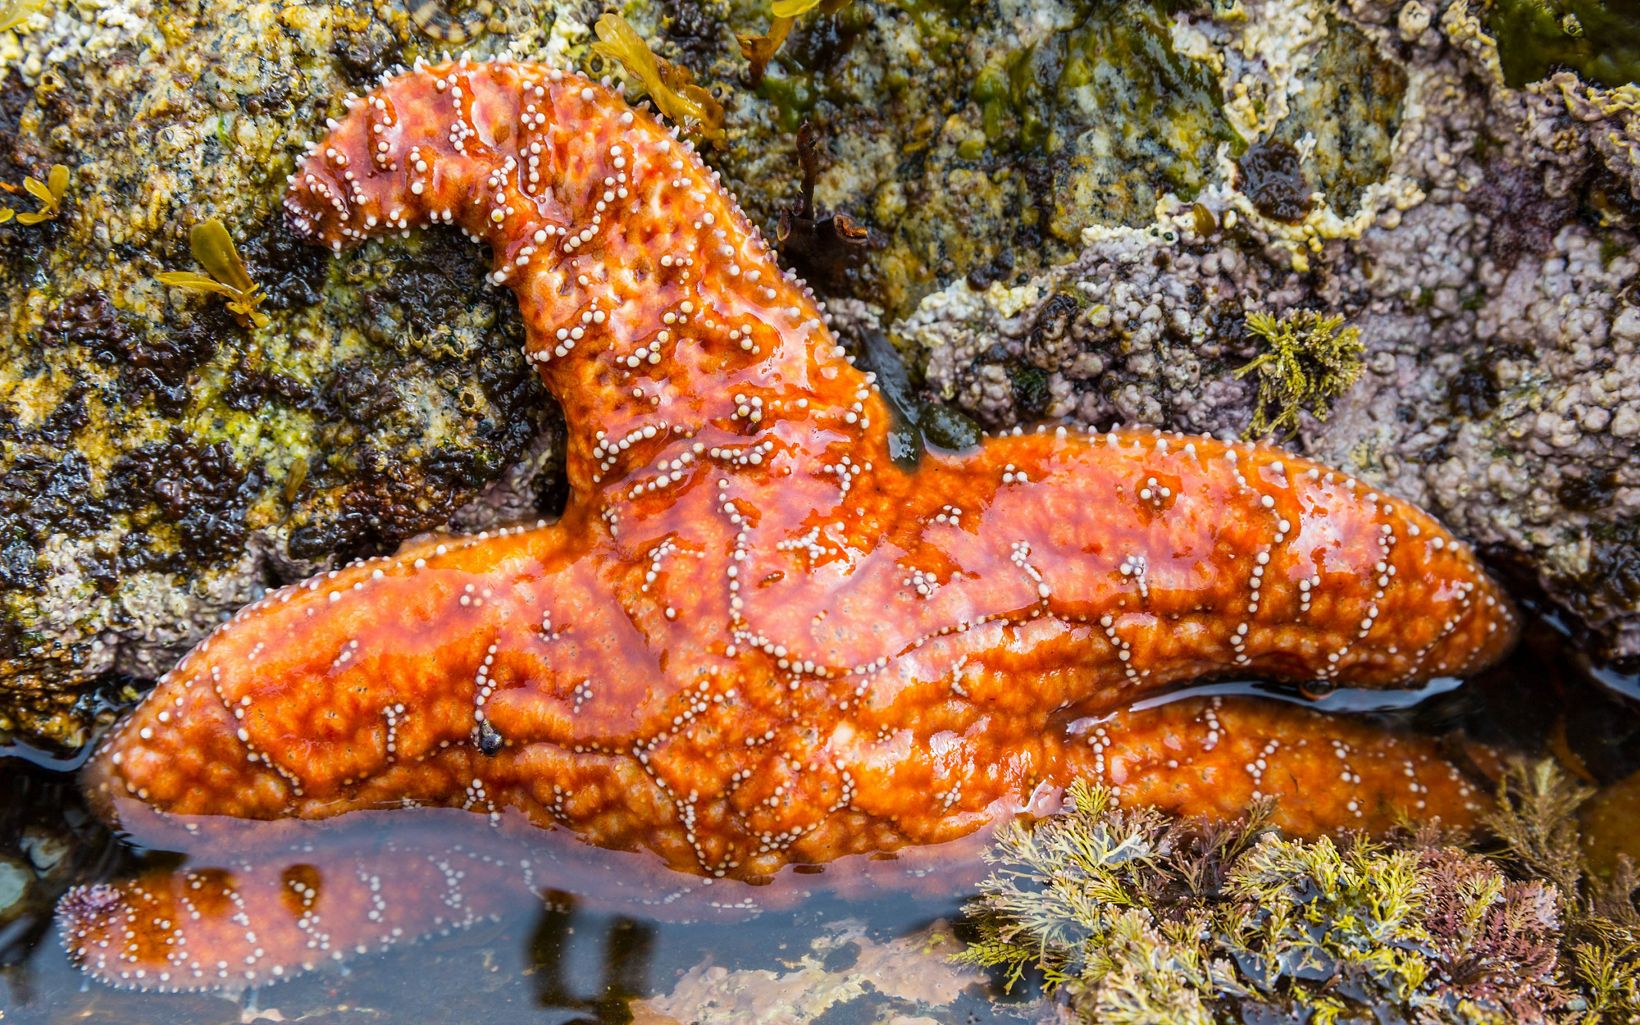 Ocean Life in Great Bear Starfish in a tide pool in the Great Bear Rainforest of BC, Canada © Jason Houston